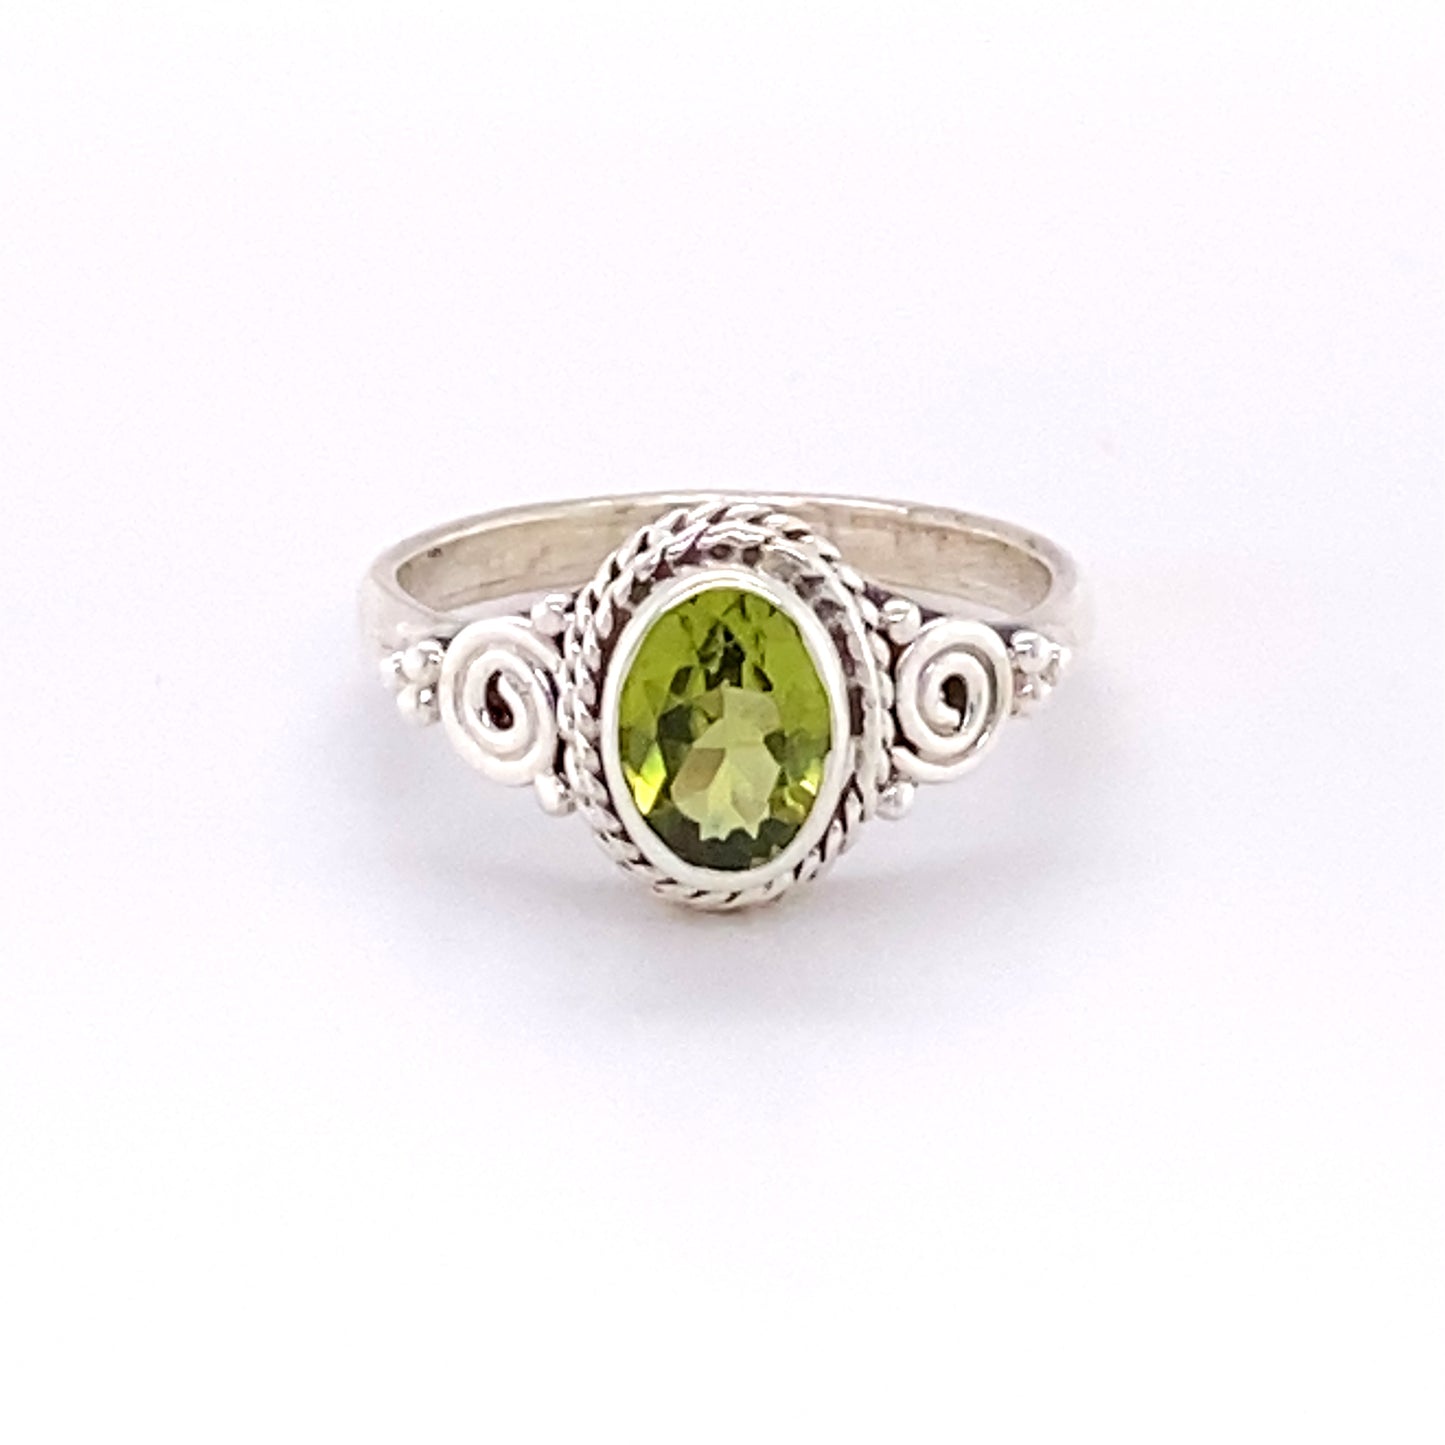 A Super Silver Oval Peridot Ring with Intricate Rope and Spiral Border.